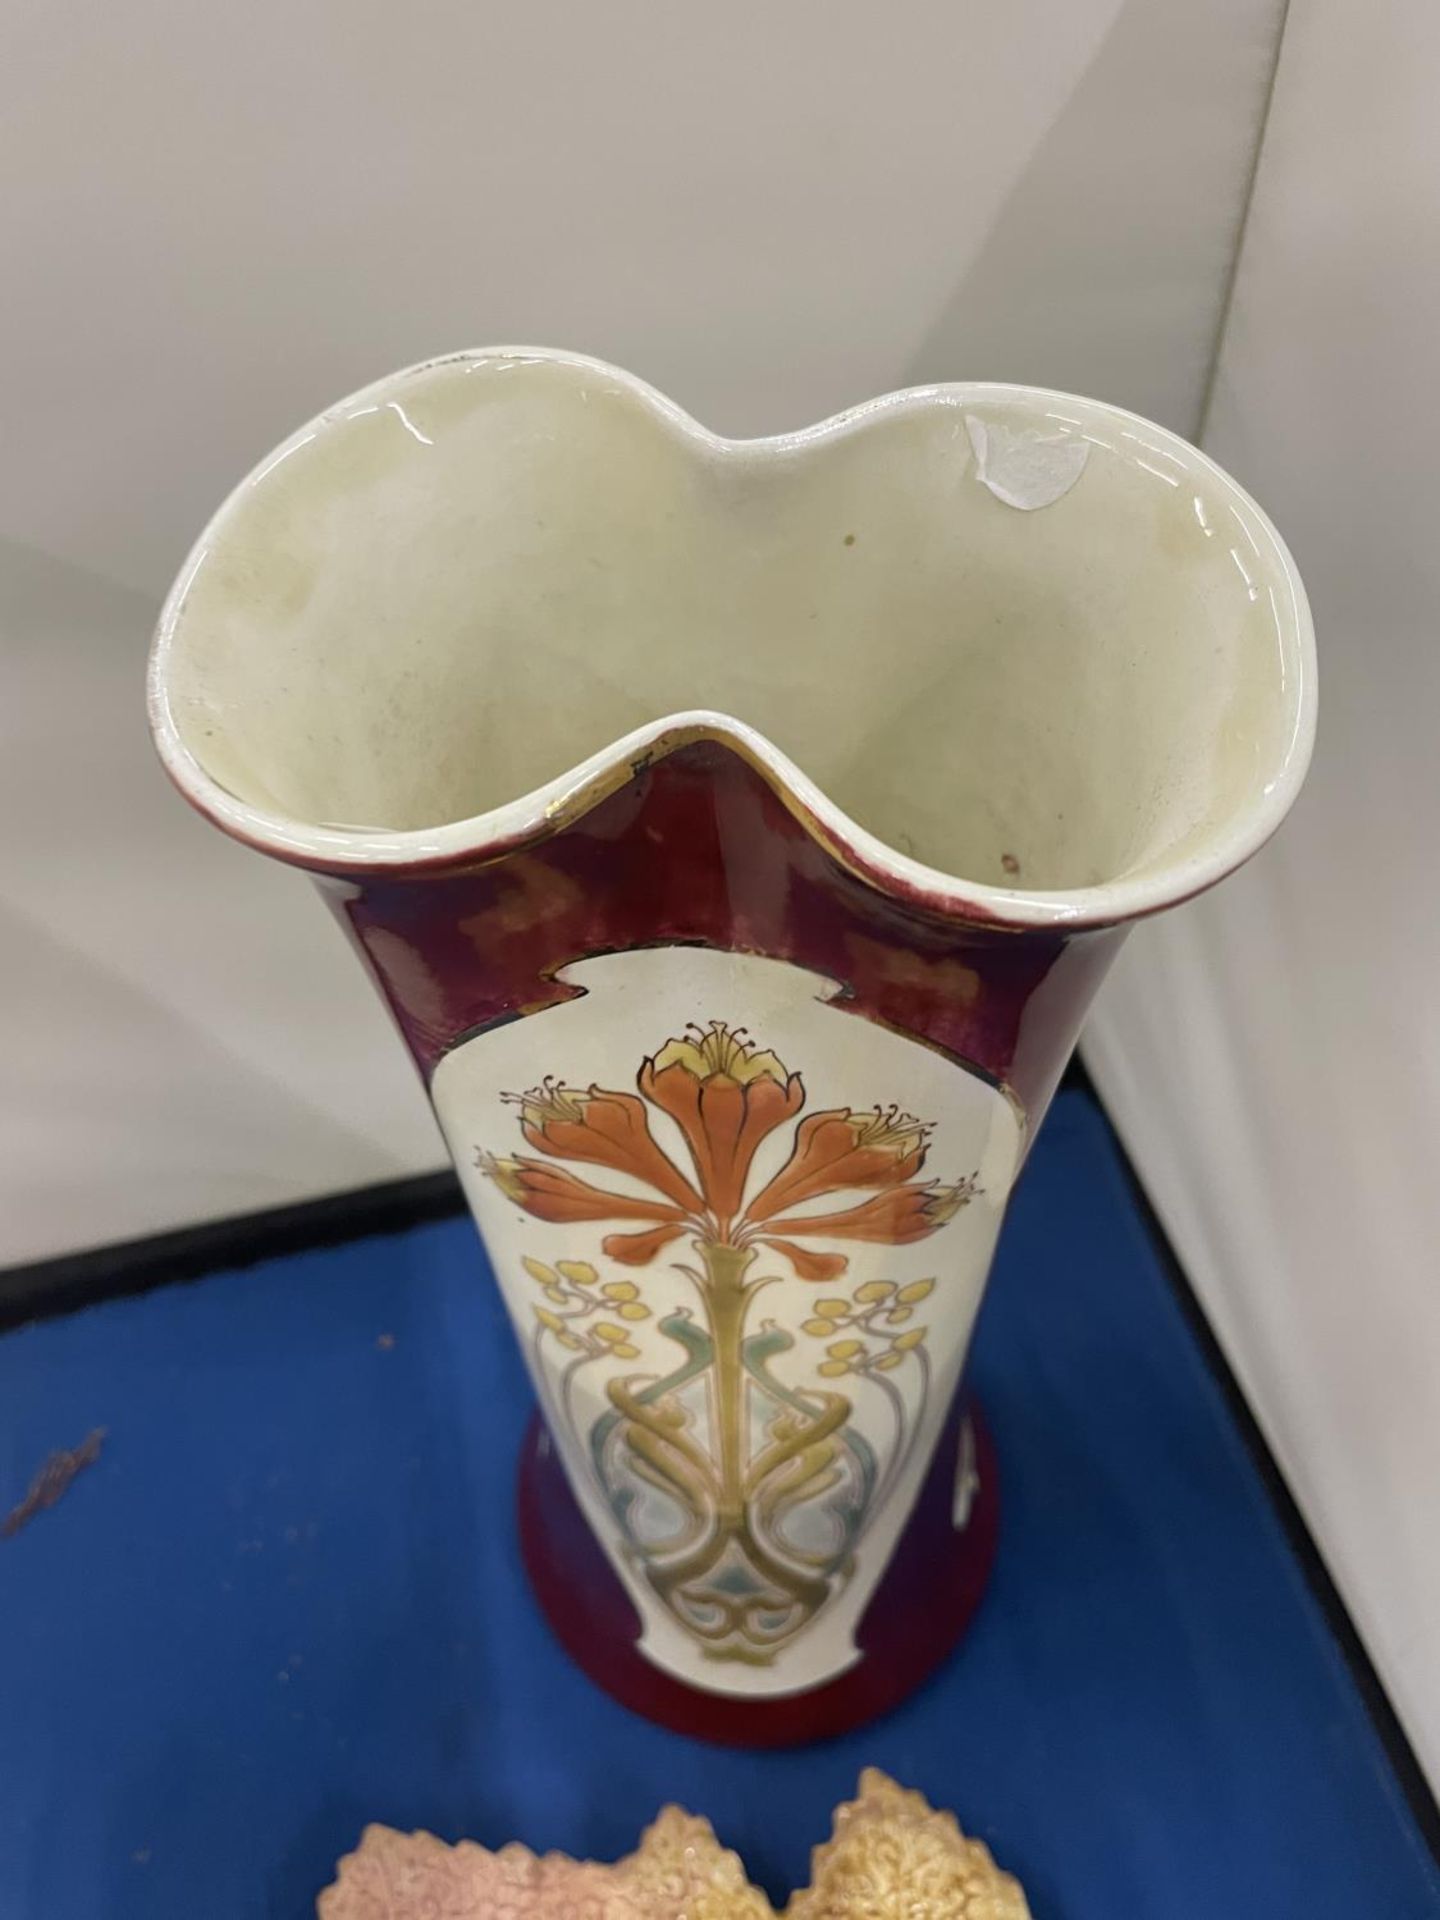 A LATE 19TH EARLY/20TH CENTURY TUBELINED ART NOUVEAU VASE AND A LEAF DISH - Image 5 of 12